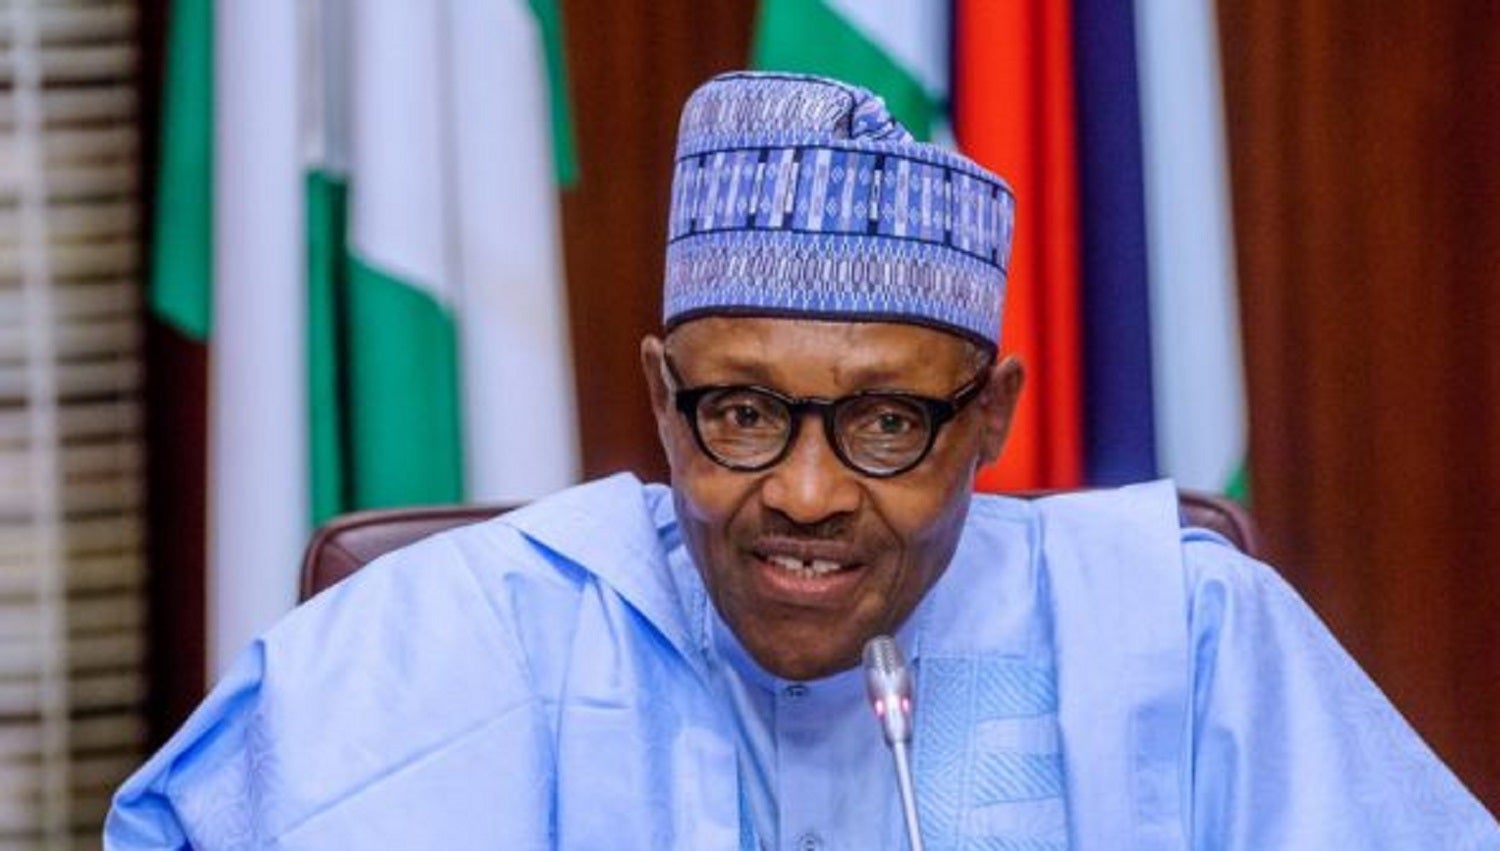 Buhari promises not to allow repeat of #EndSARS protests